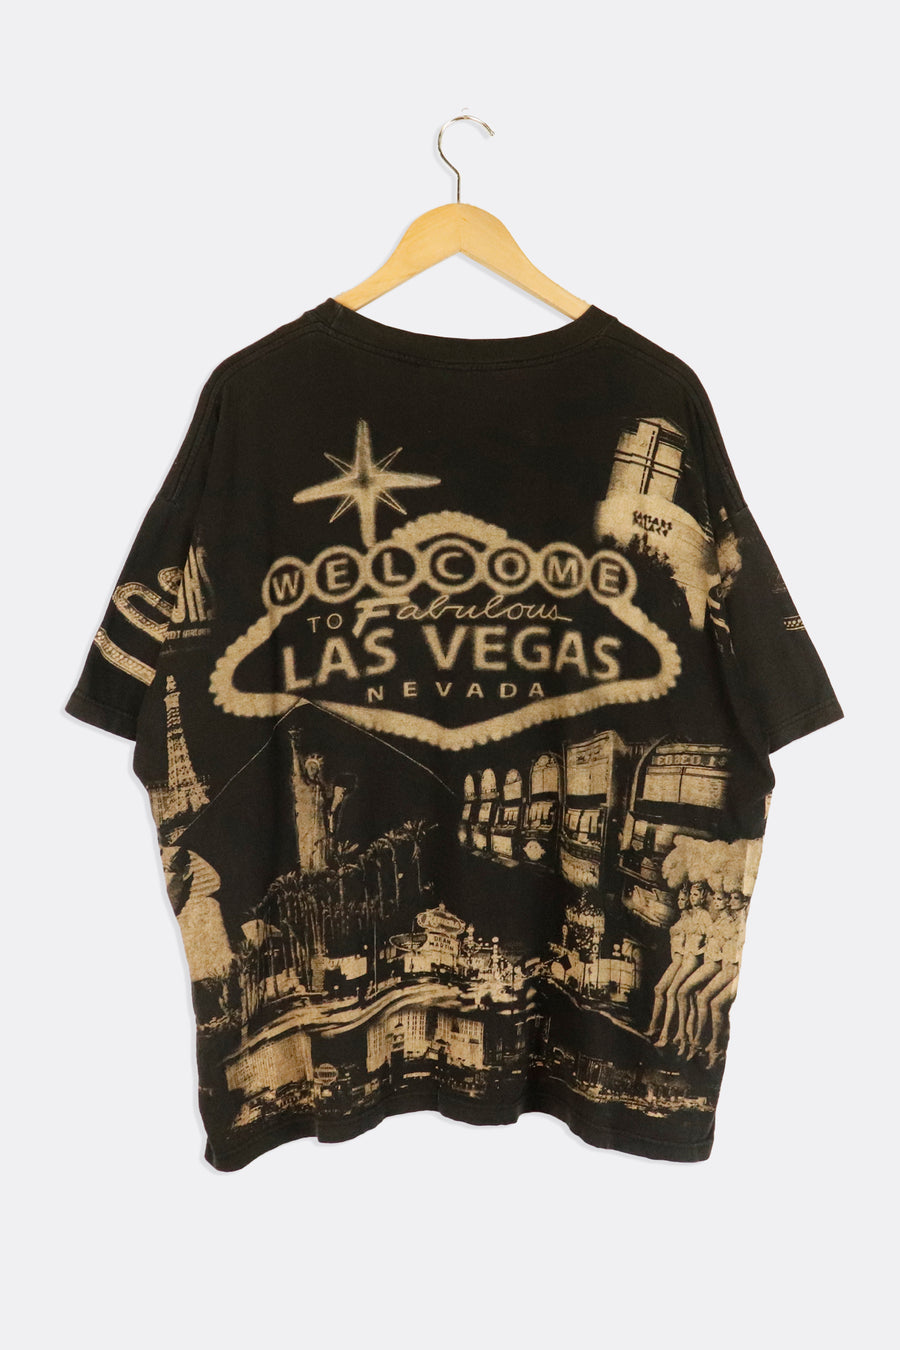 Vintage Las Vegas Sign And Strip All Over Faded Print T Shirt Sz 2XL